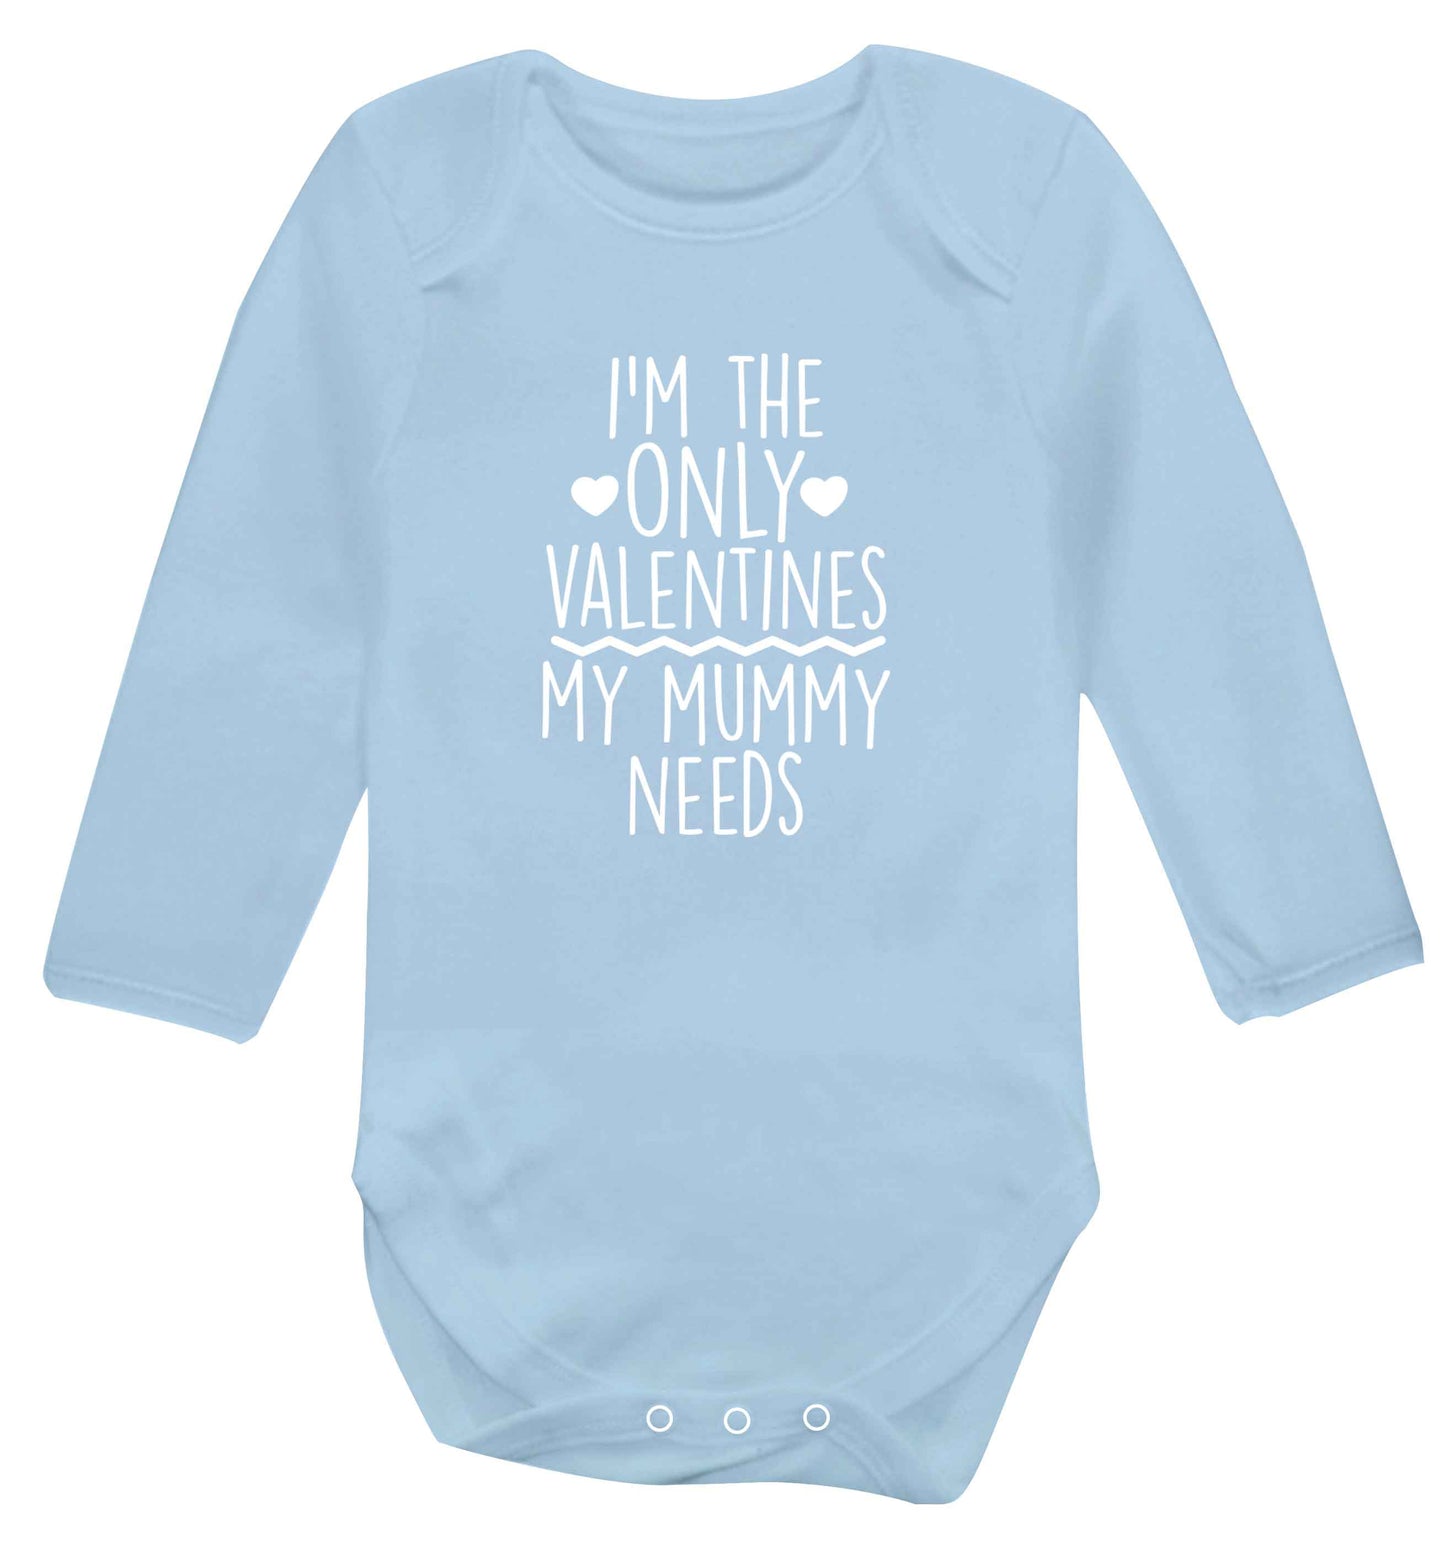 I'm the only valentines my mummy needs baby vest long sleeved pale blue 6-12 months